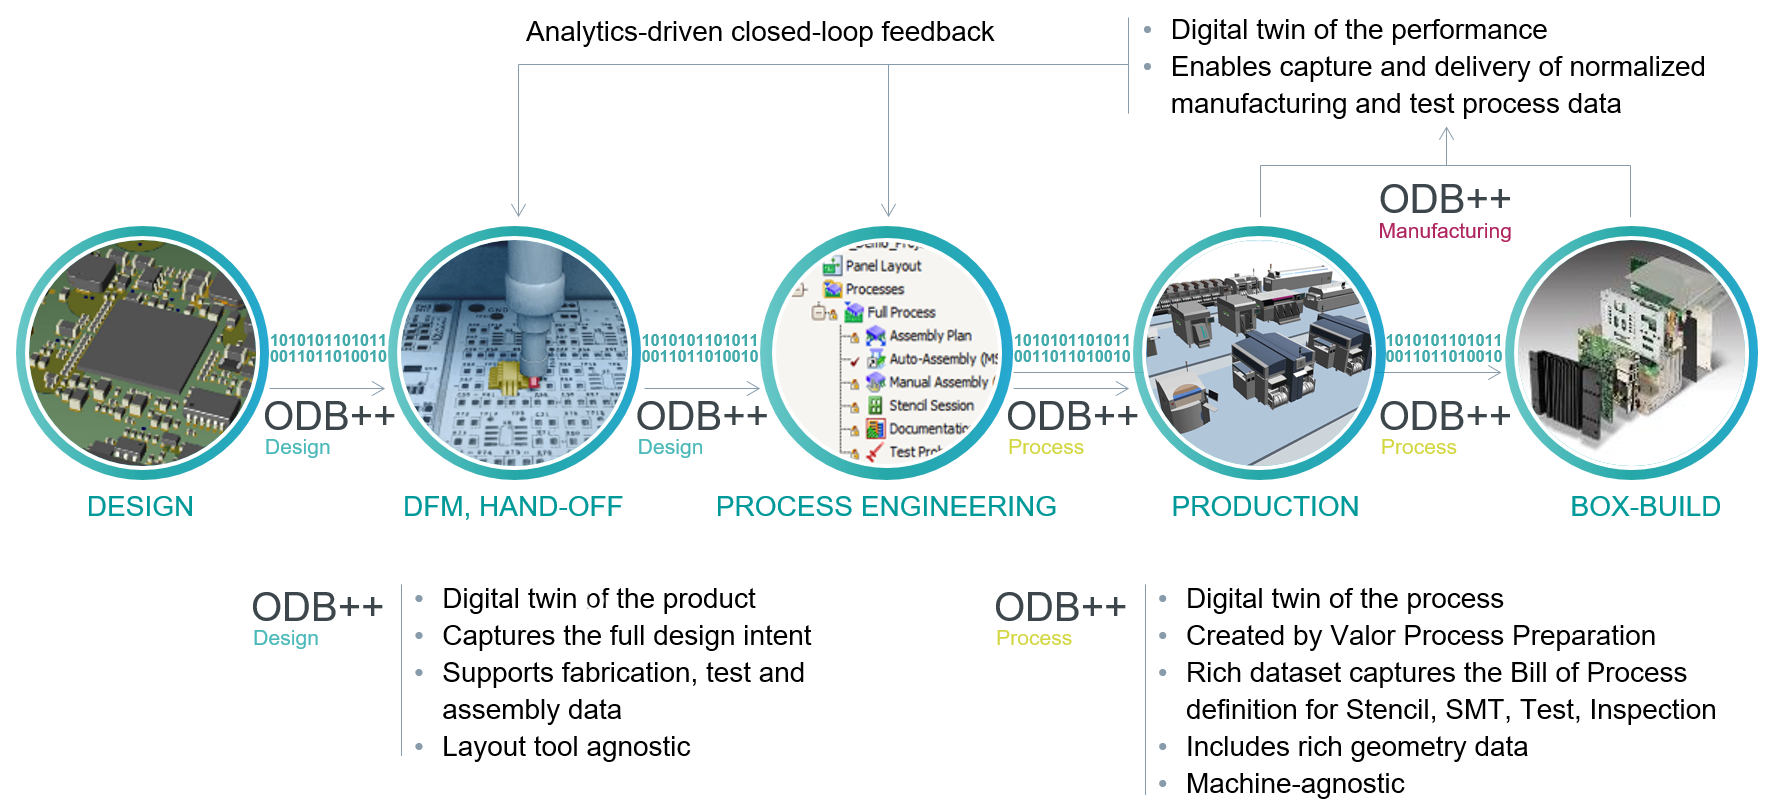 A continuous digital flow based on ODB ++, the open and intelligent data exchange format